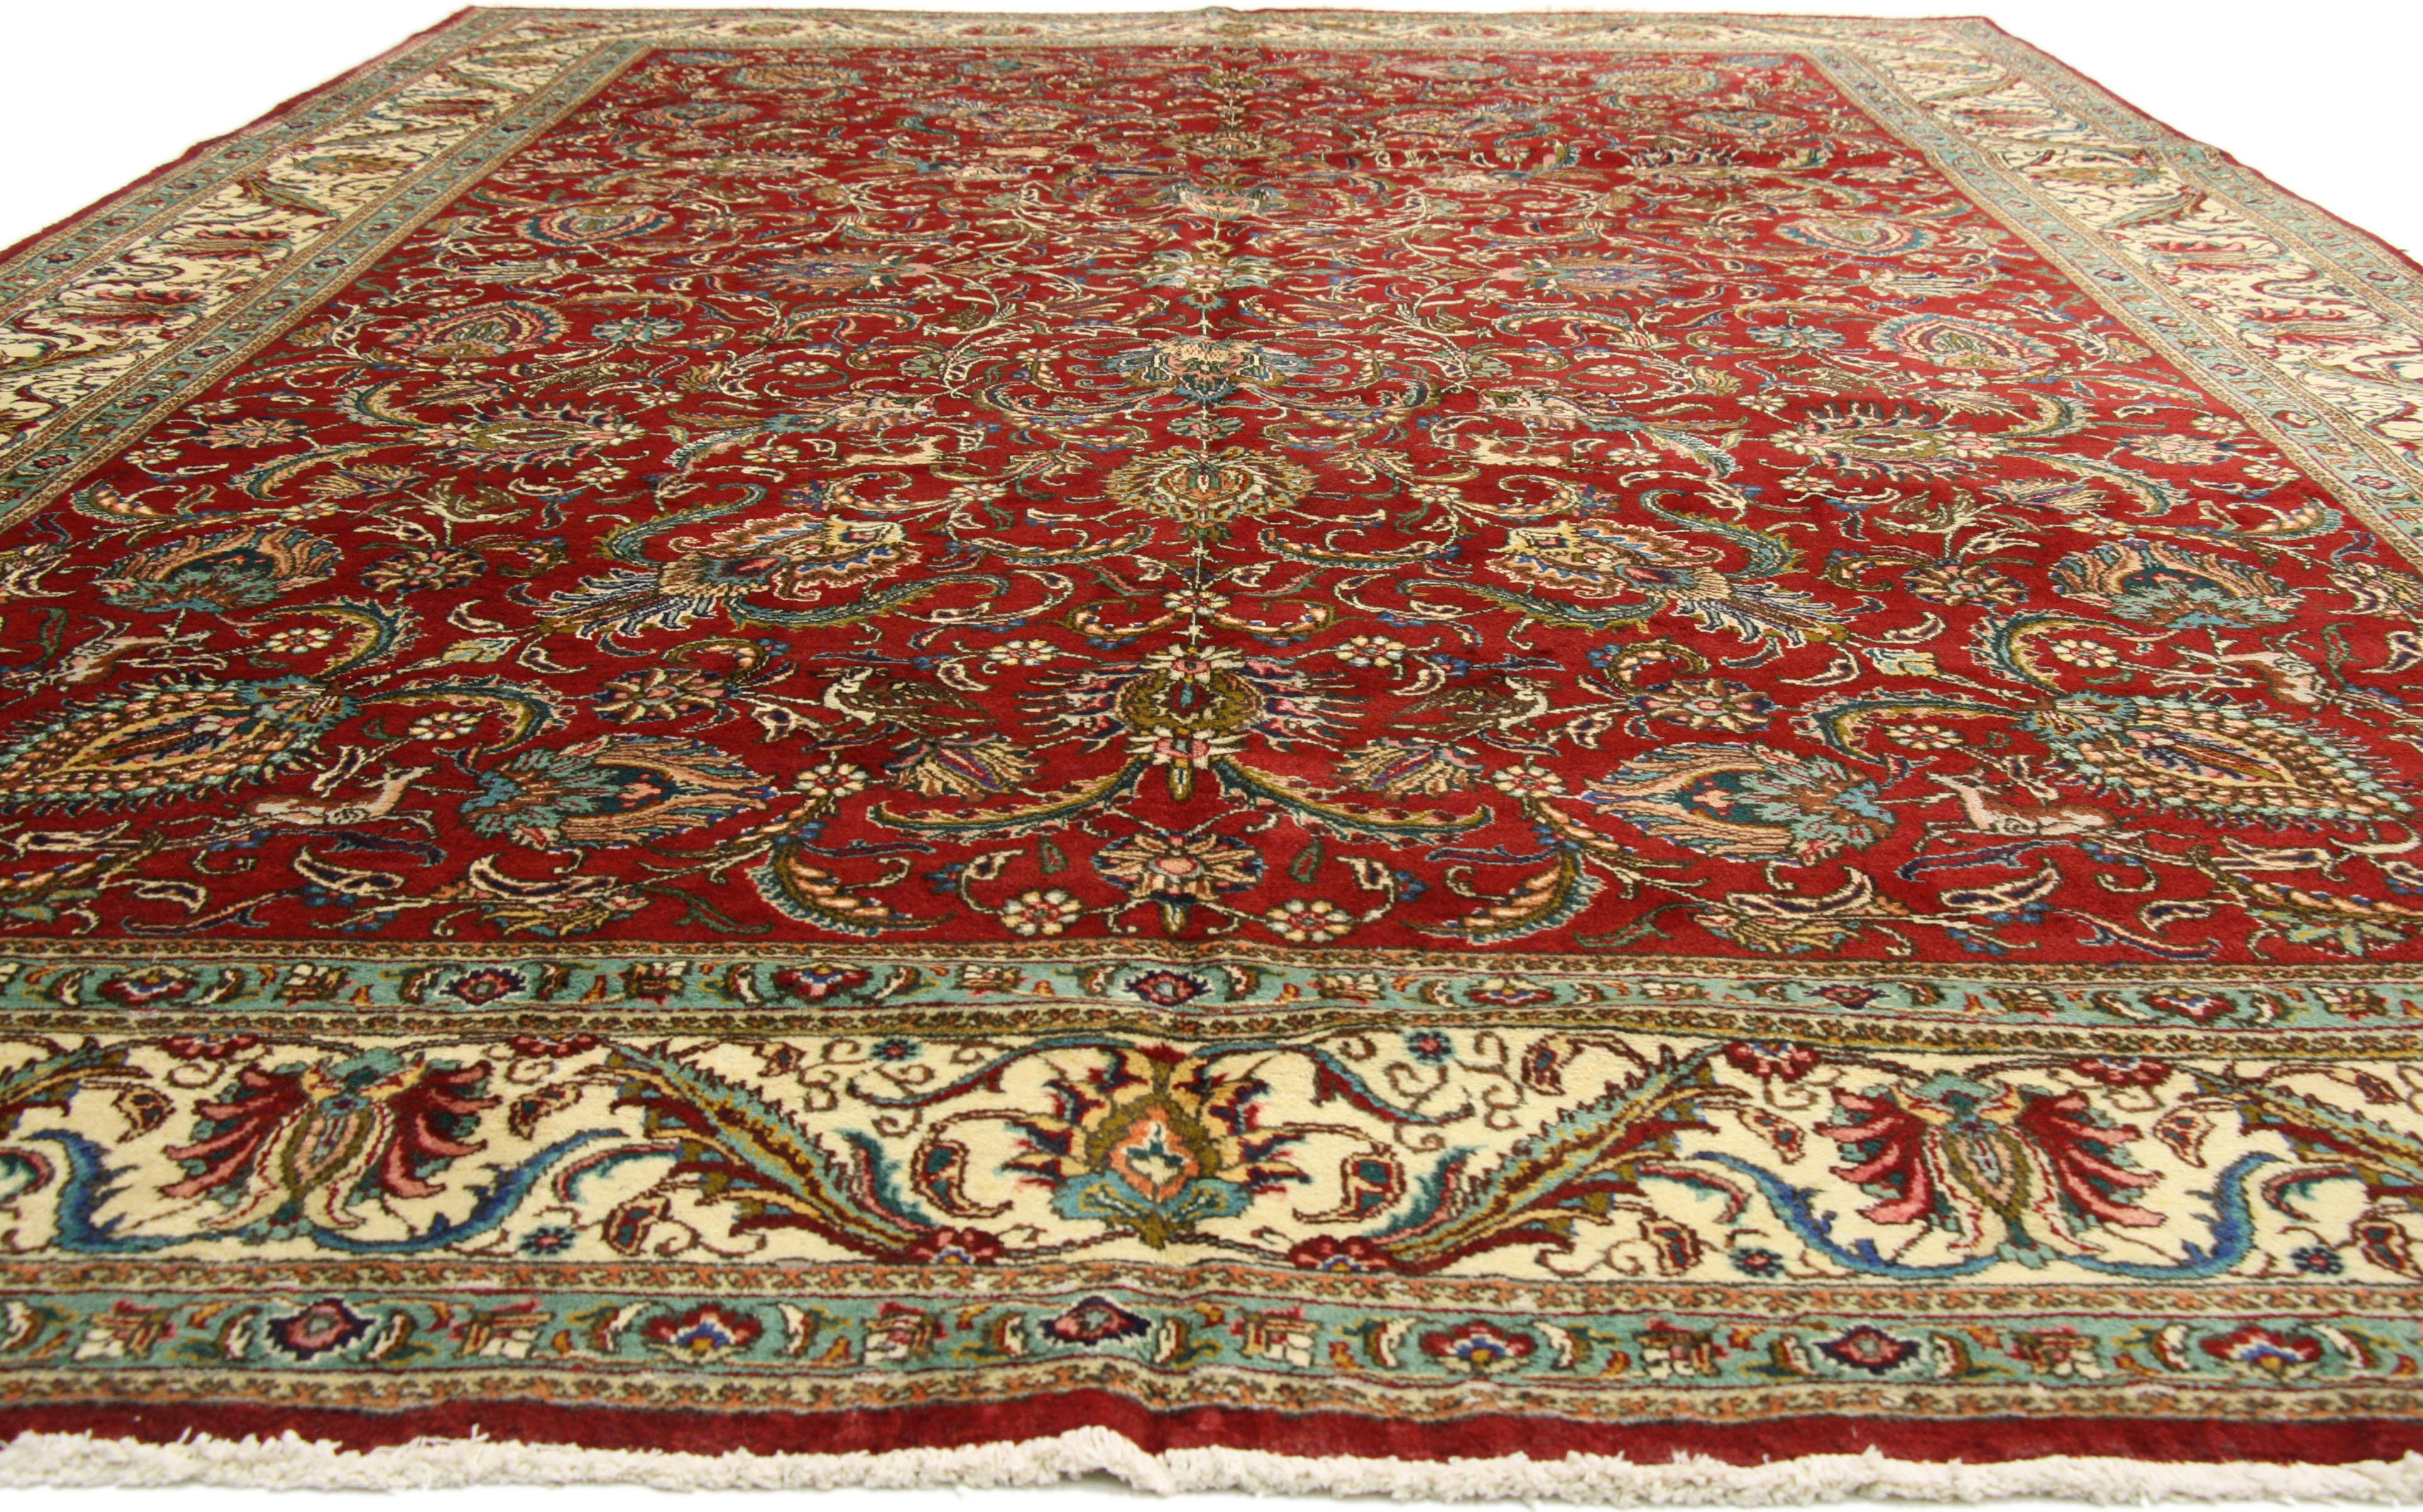 76352, vintage Persian Tabriz gallery rug with hunting scene and traditional medival style 11'03 x 16'01. This hand-knotted wool vintage Persian Tabriz gallery rug features an inconspicuous hunting scene composed of an all-over pattern composed of